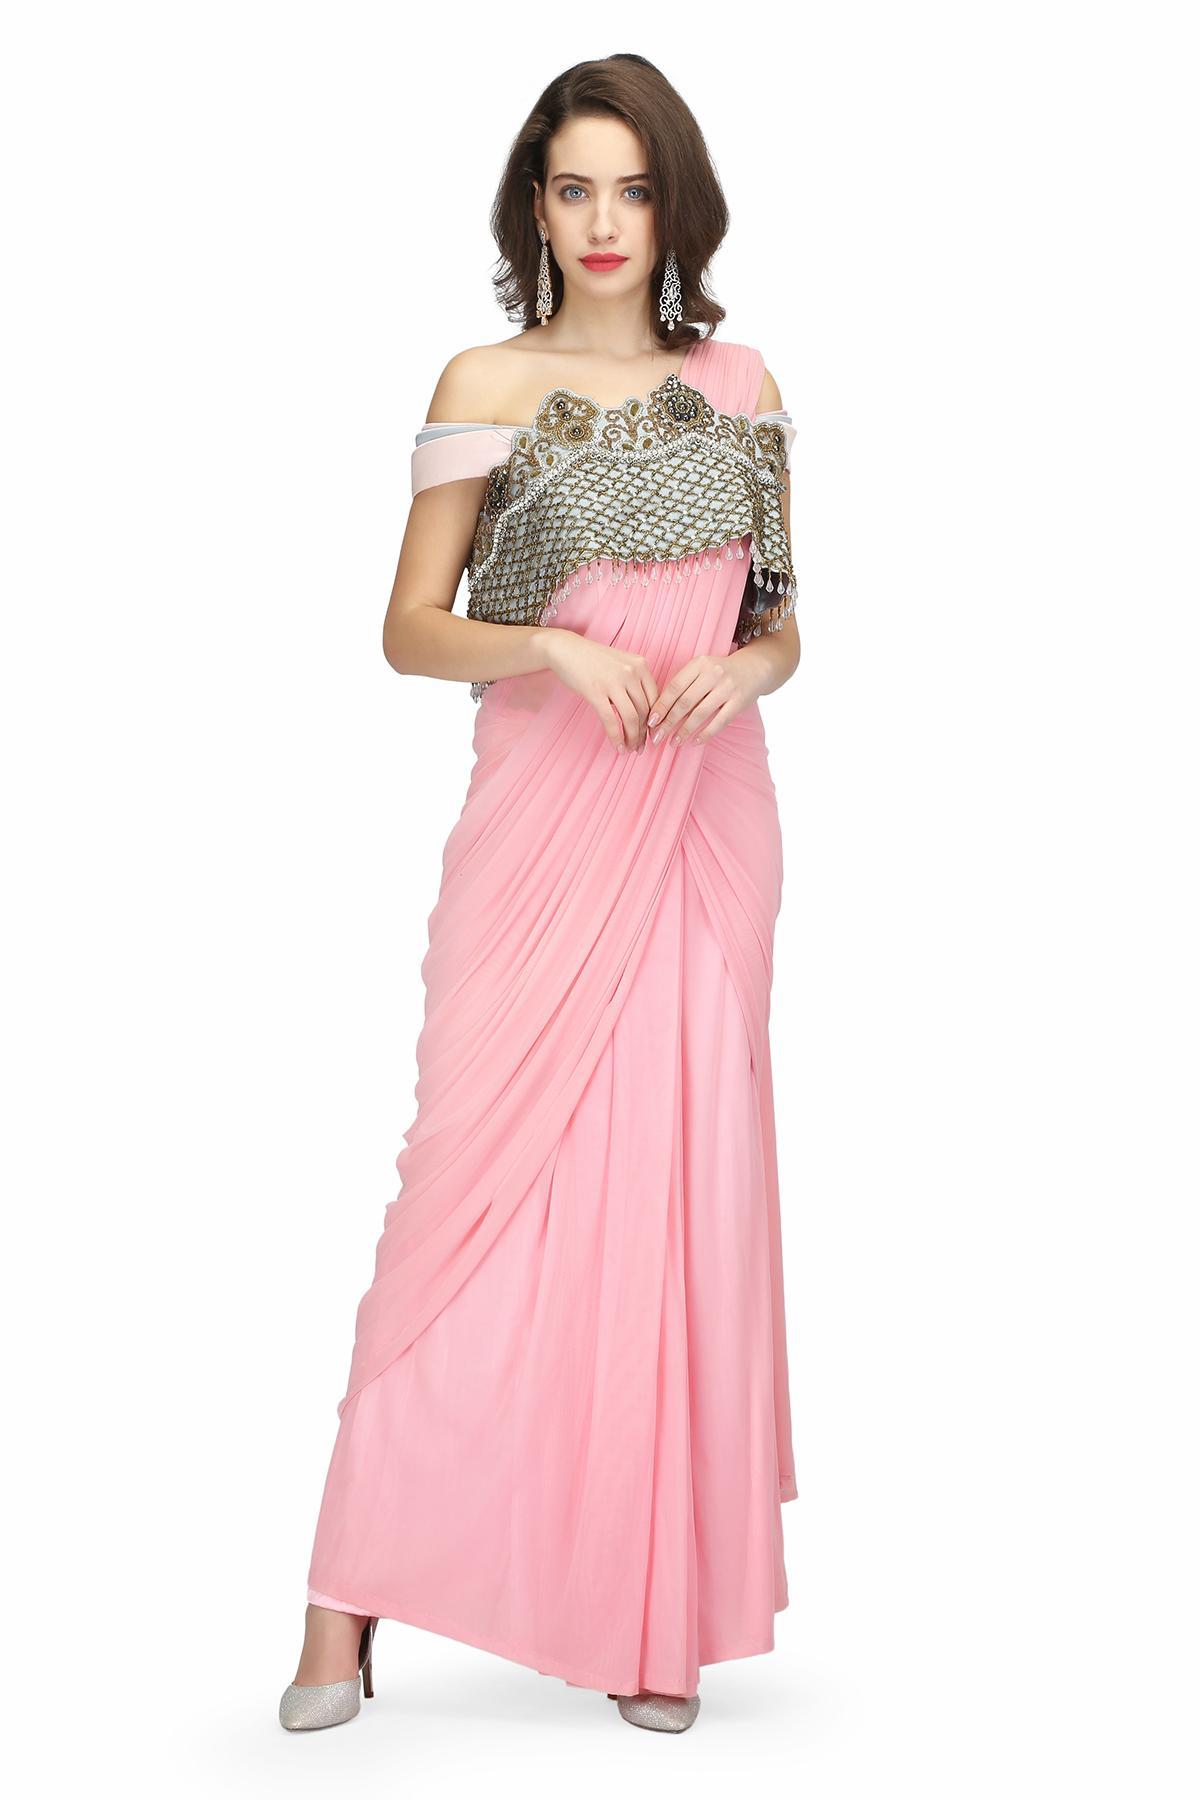 Buy Sarees With Shrugs Online In India At Best Price Offers | Tata CLiQ